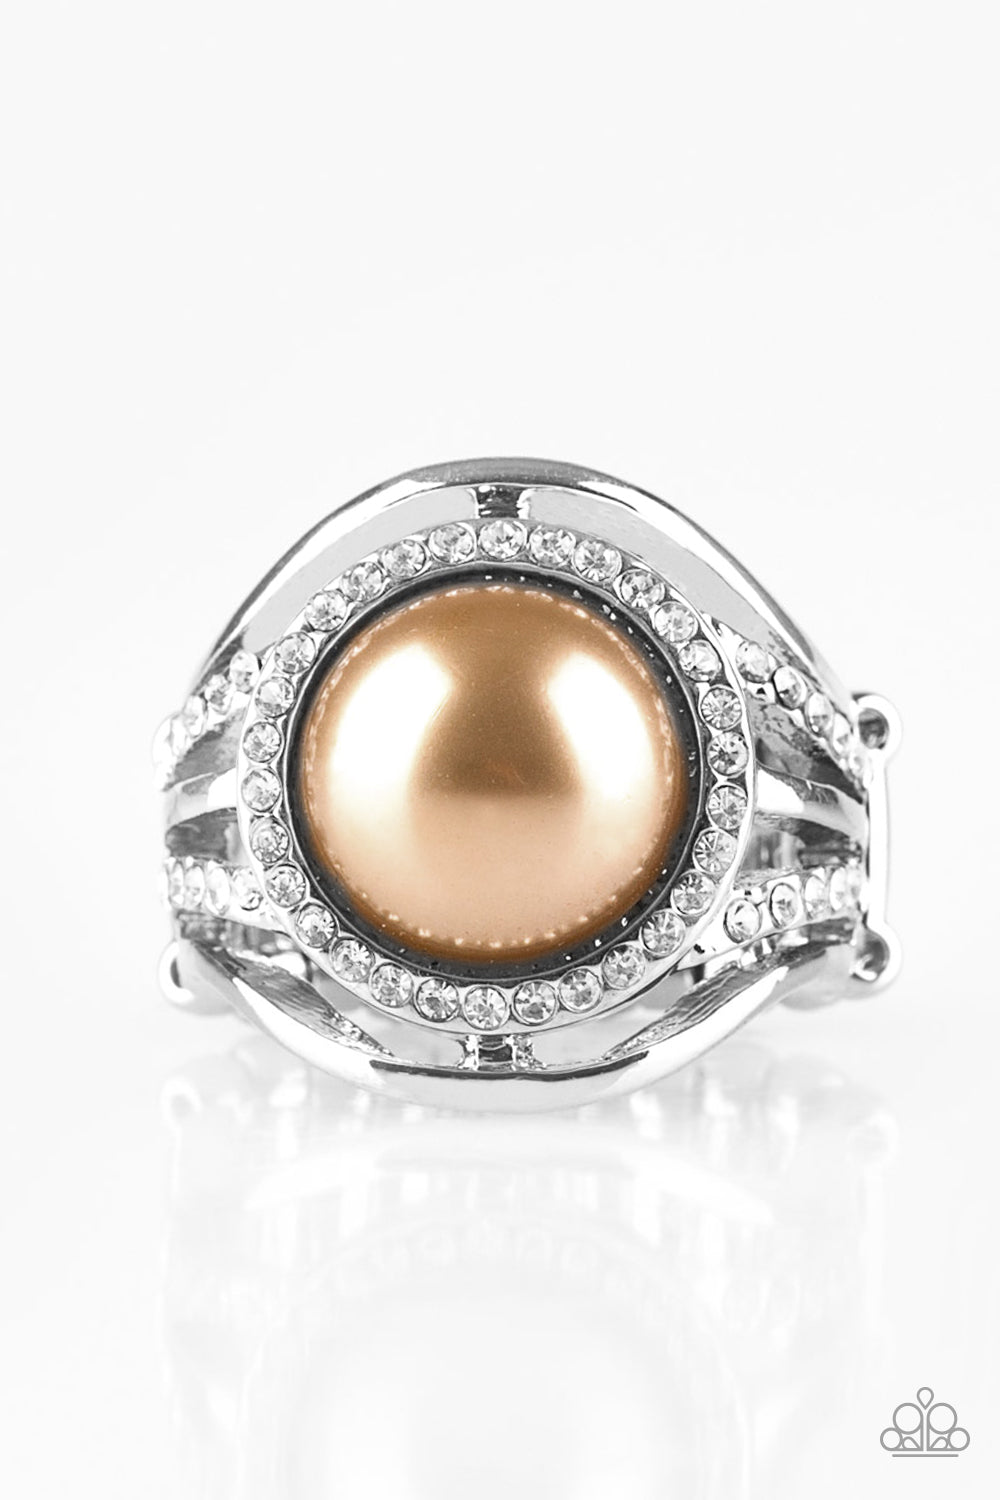 Pampered In Pearls - Brown and Silver Ring - Paparazzi Accessories - Shiny silver bands and white rhinestone encrusted bands flare from a brown pearl drop center for a glamorous look. Features a stretchy band for a flexible fit. Sold as one individual ring.